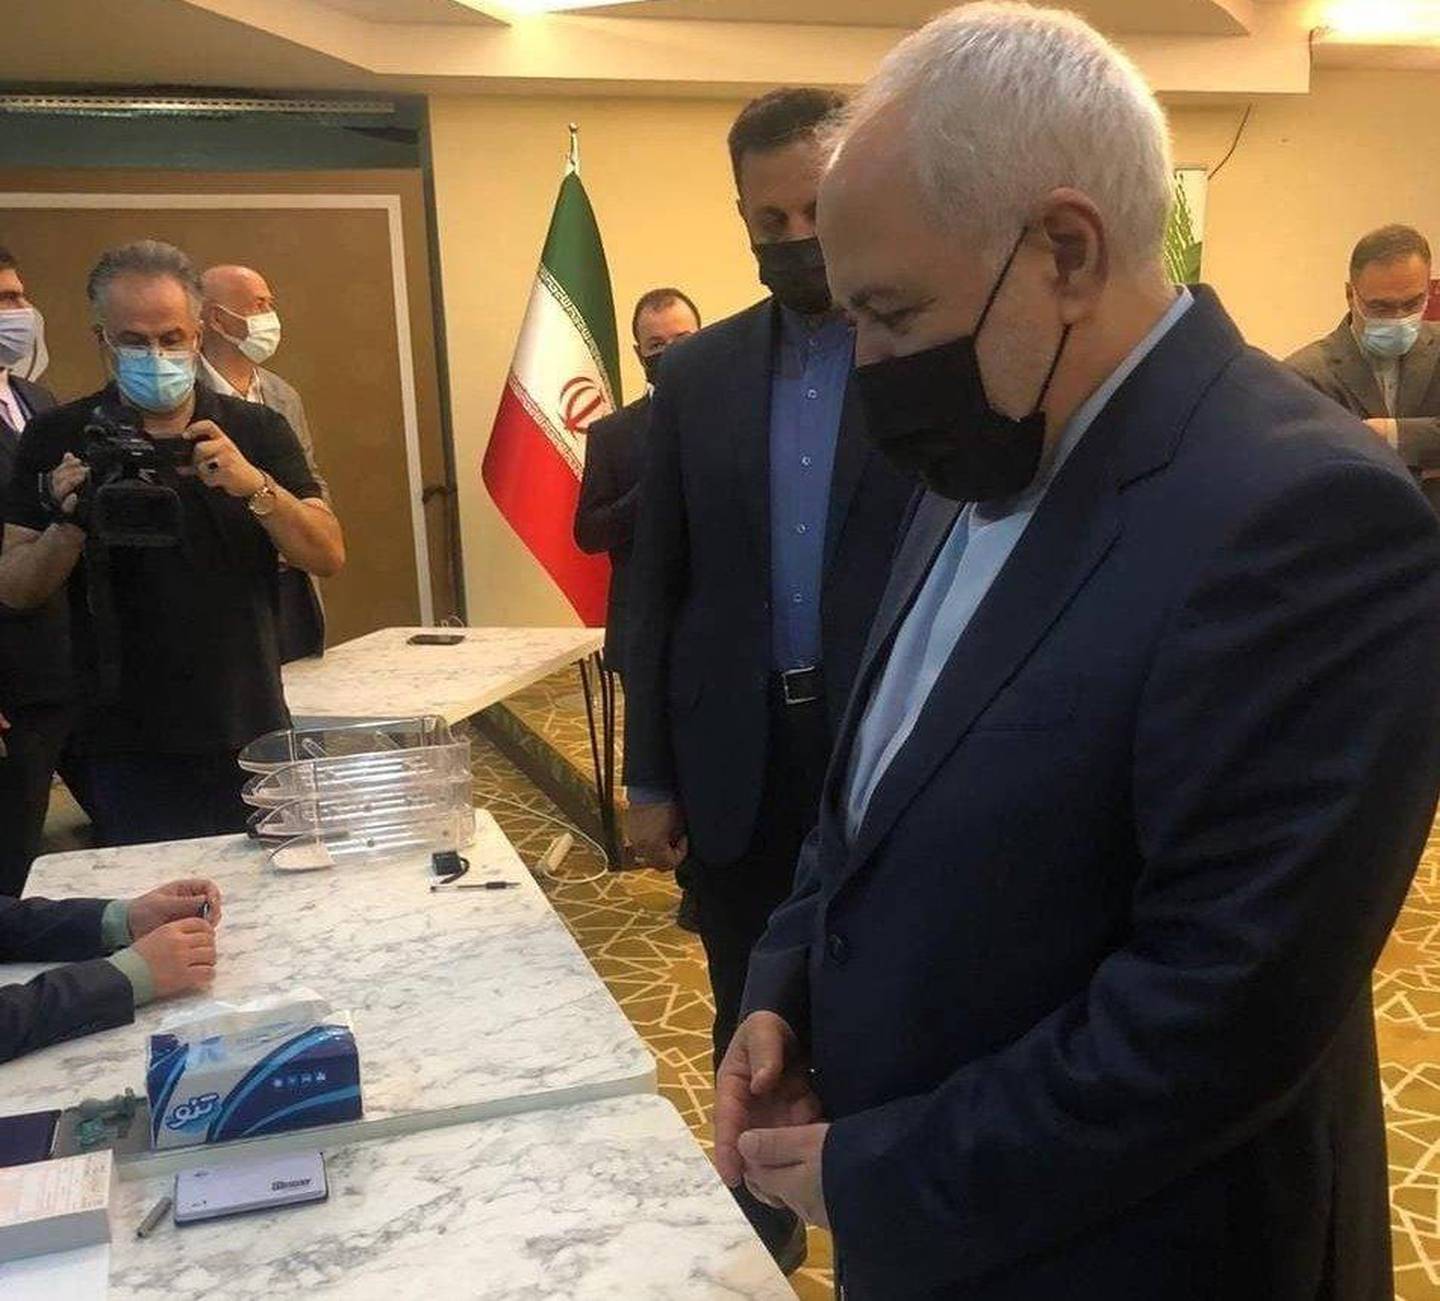 Iran's foreign minister casts his ballot in Turkey while on a diplomatic trip. Tasnim 